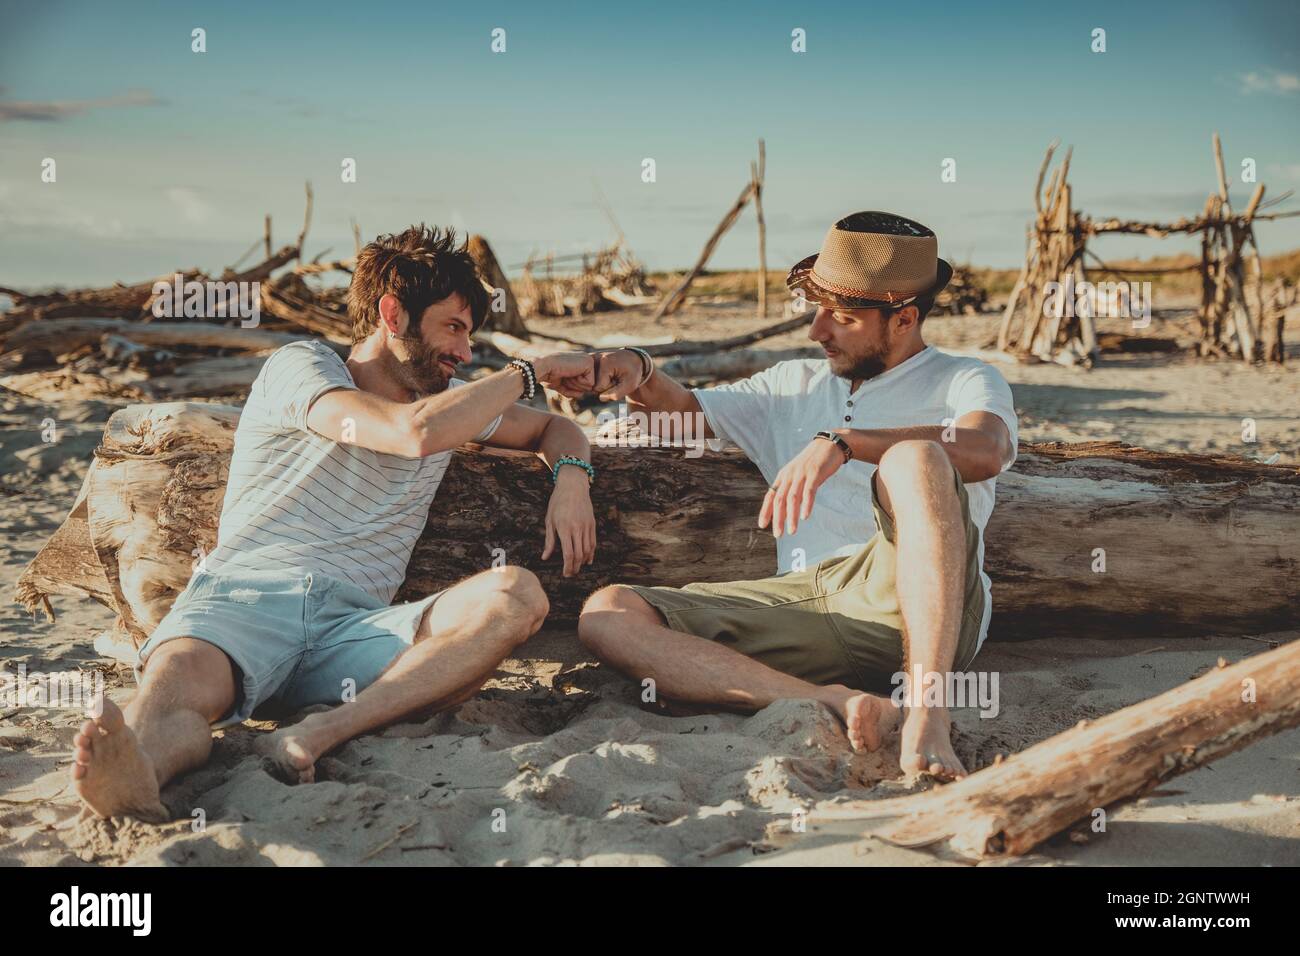 Two boys sitting on the beach greeting each other with their fists. Young people pounding their fists to greet each other Stock Photo